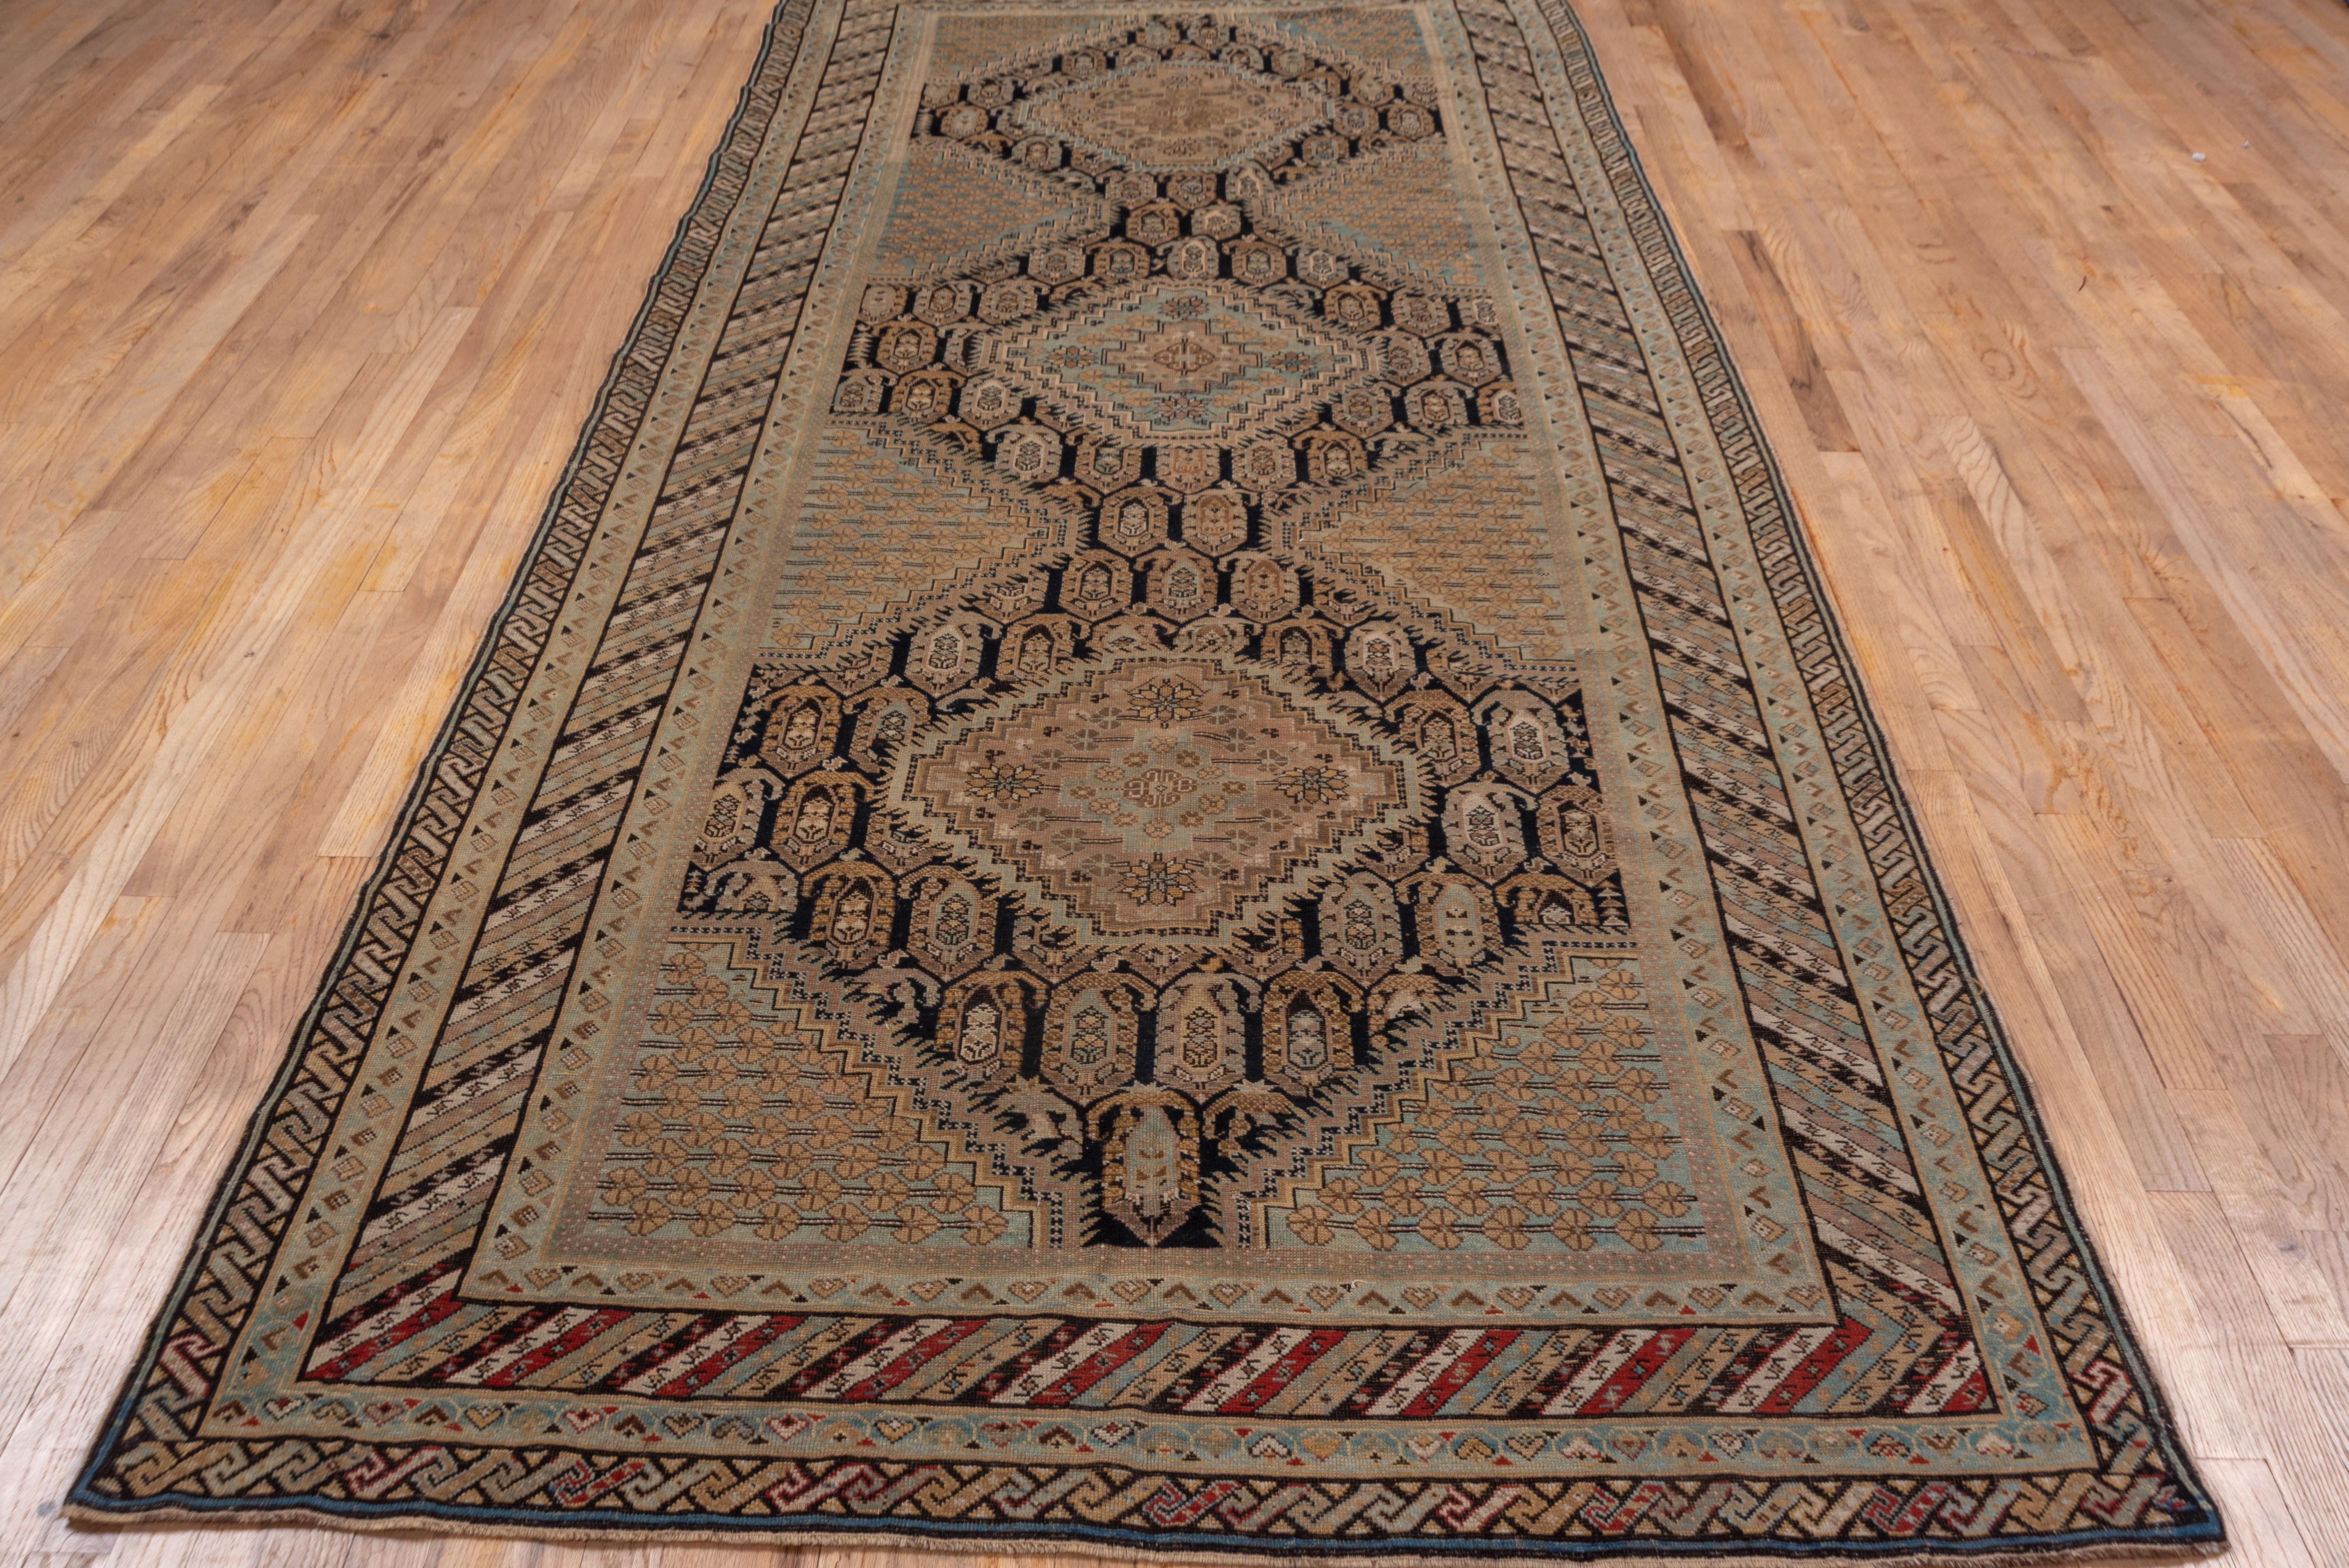 Classic black ground east Caucasian rug with three stepped octagon medallions and matching side and corner motives, with botehs behind and a diagonally striped border.